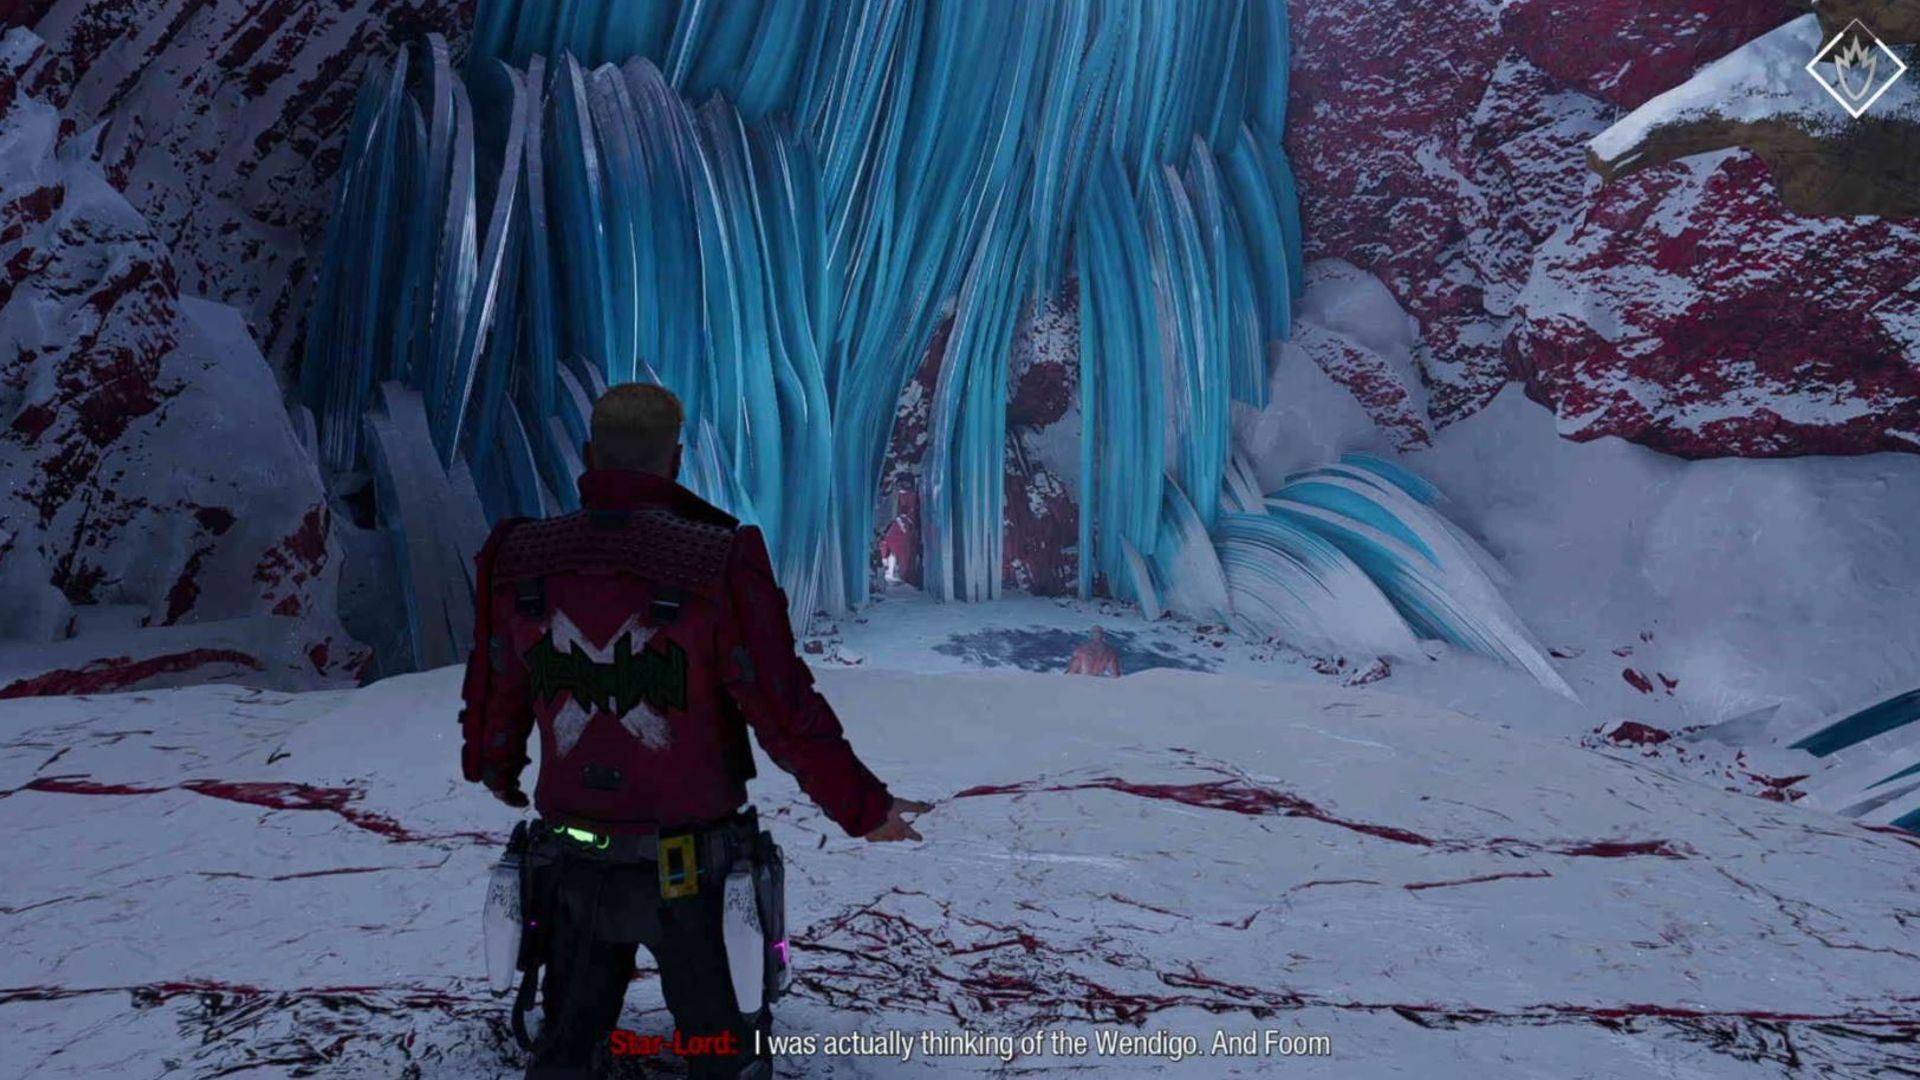 Guardians of the Galaxy outfit locations: The ice wall can be seen with Star-Lord standing on the cliff up to the outfit box.